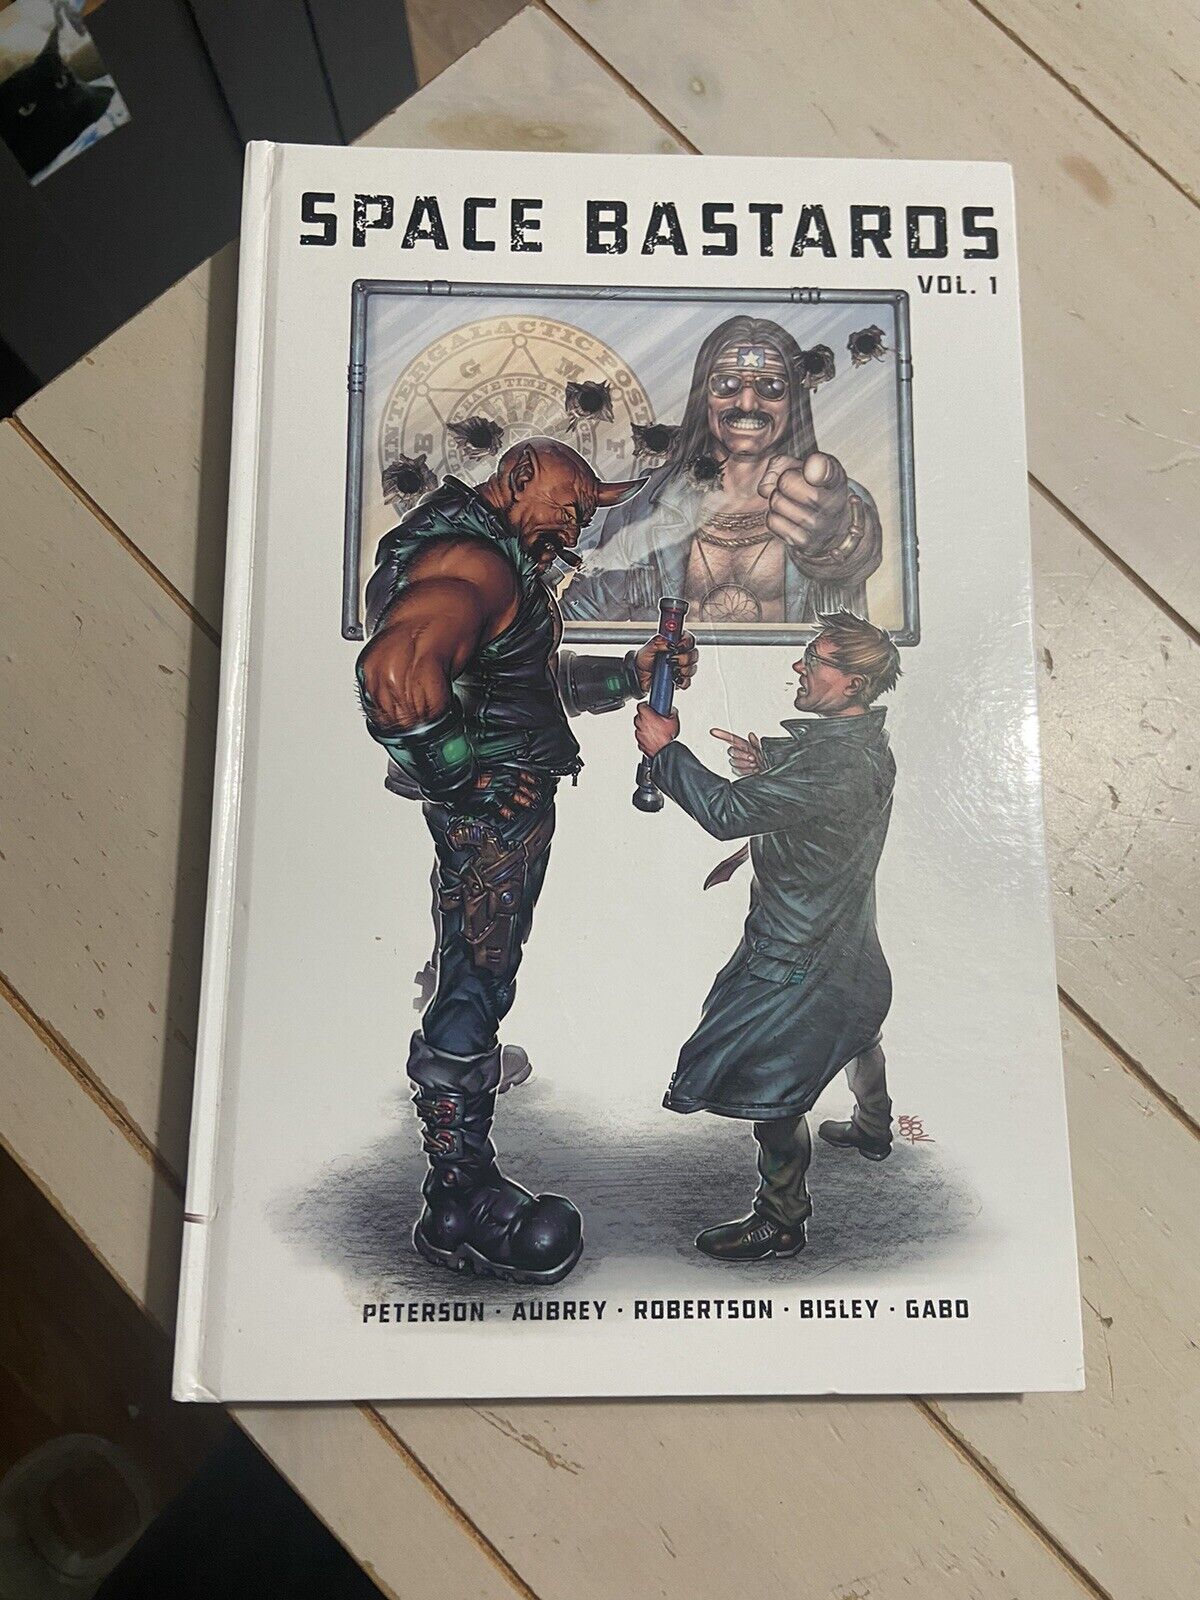 Space Bastards Vol 1 Collected Deluxe Hardcover Omnibus Darick Robertson SIGNED